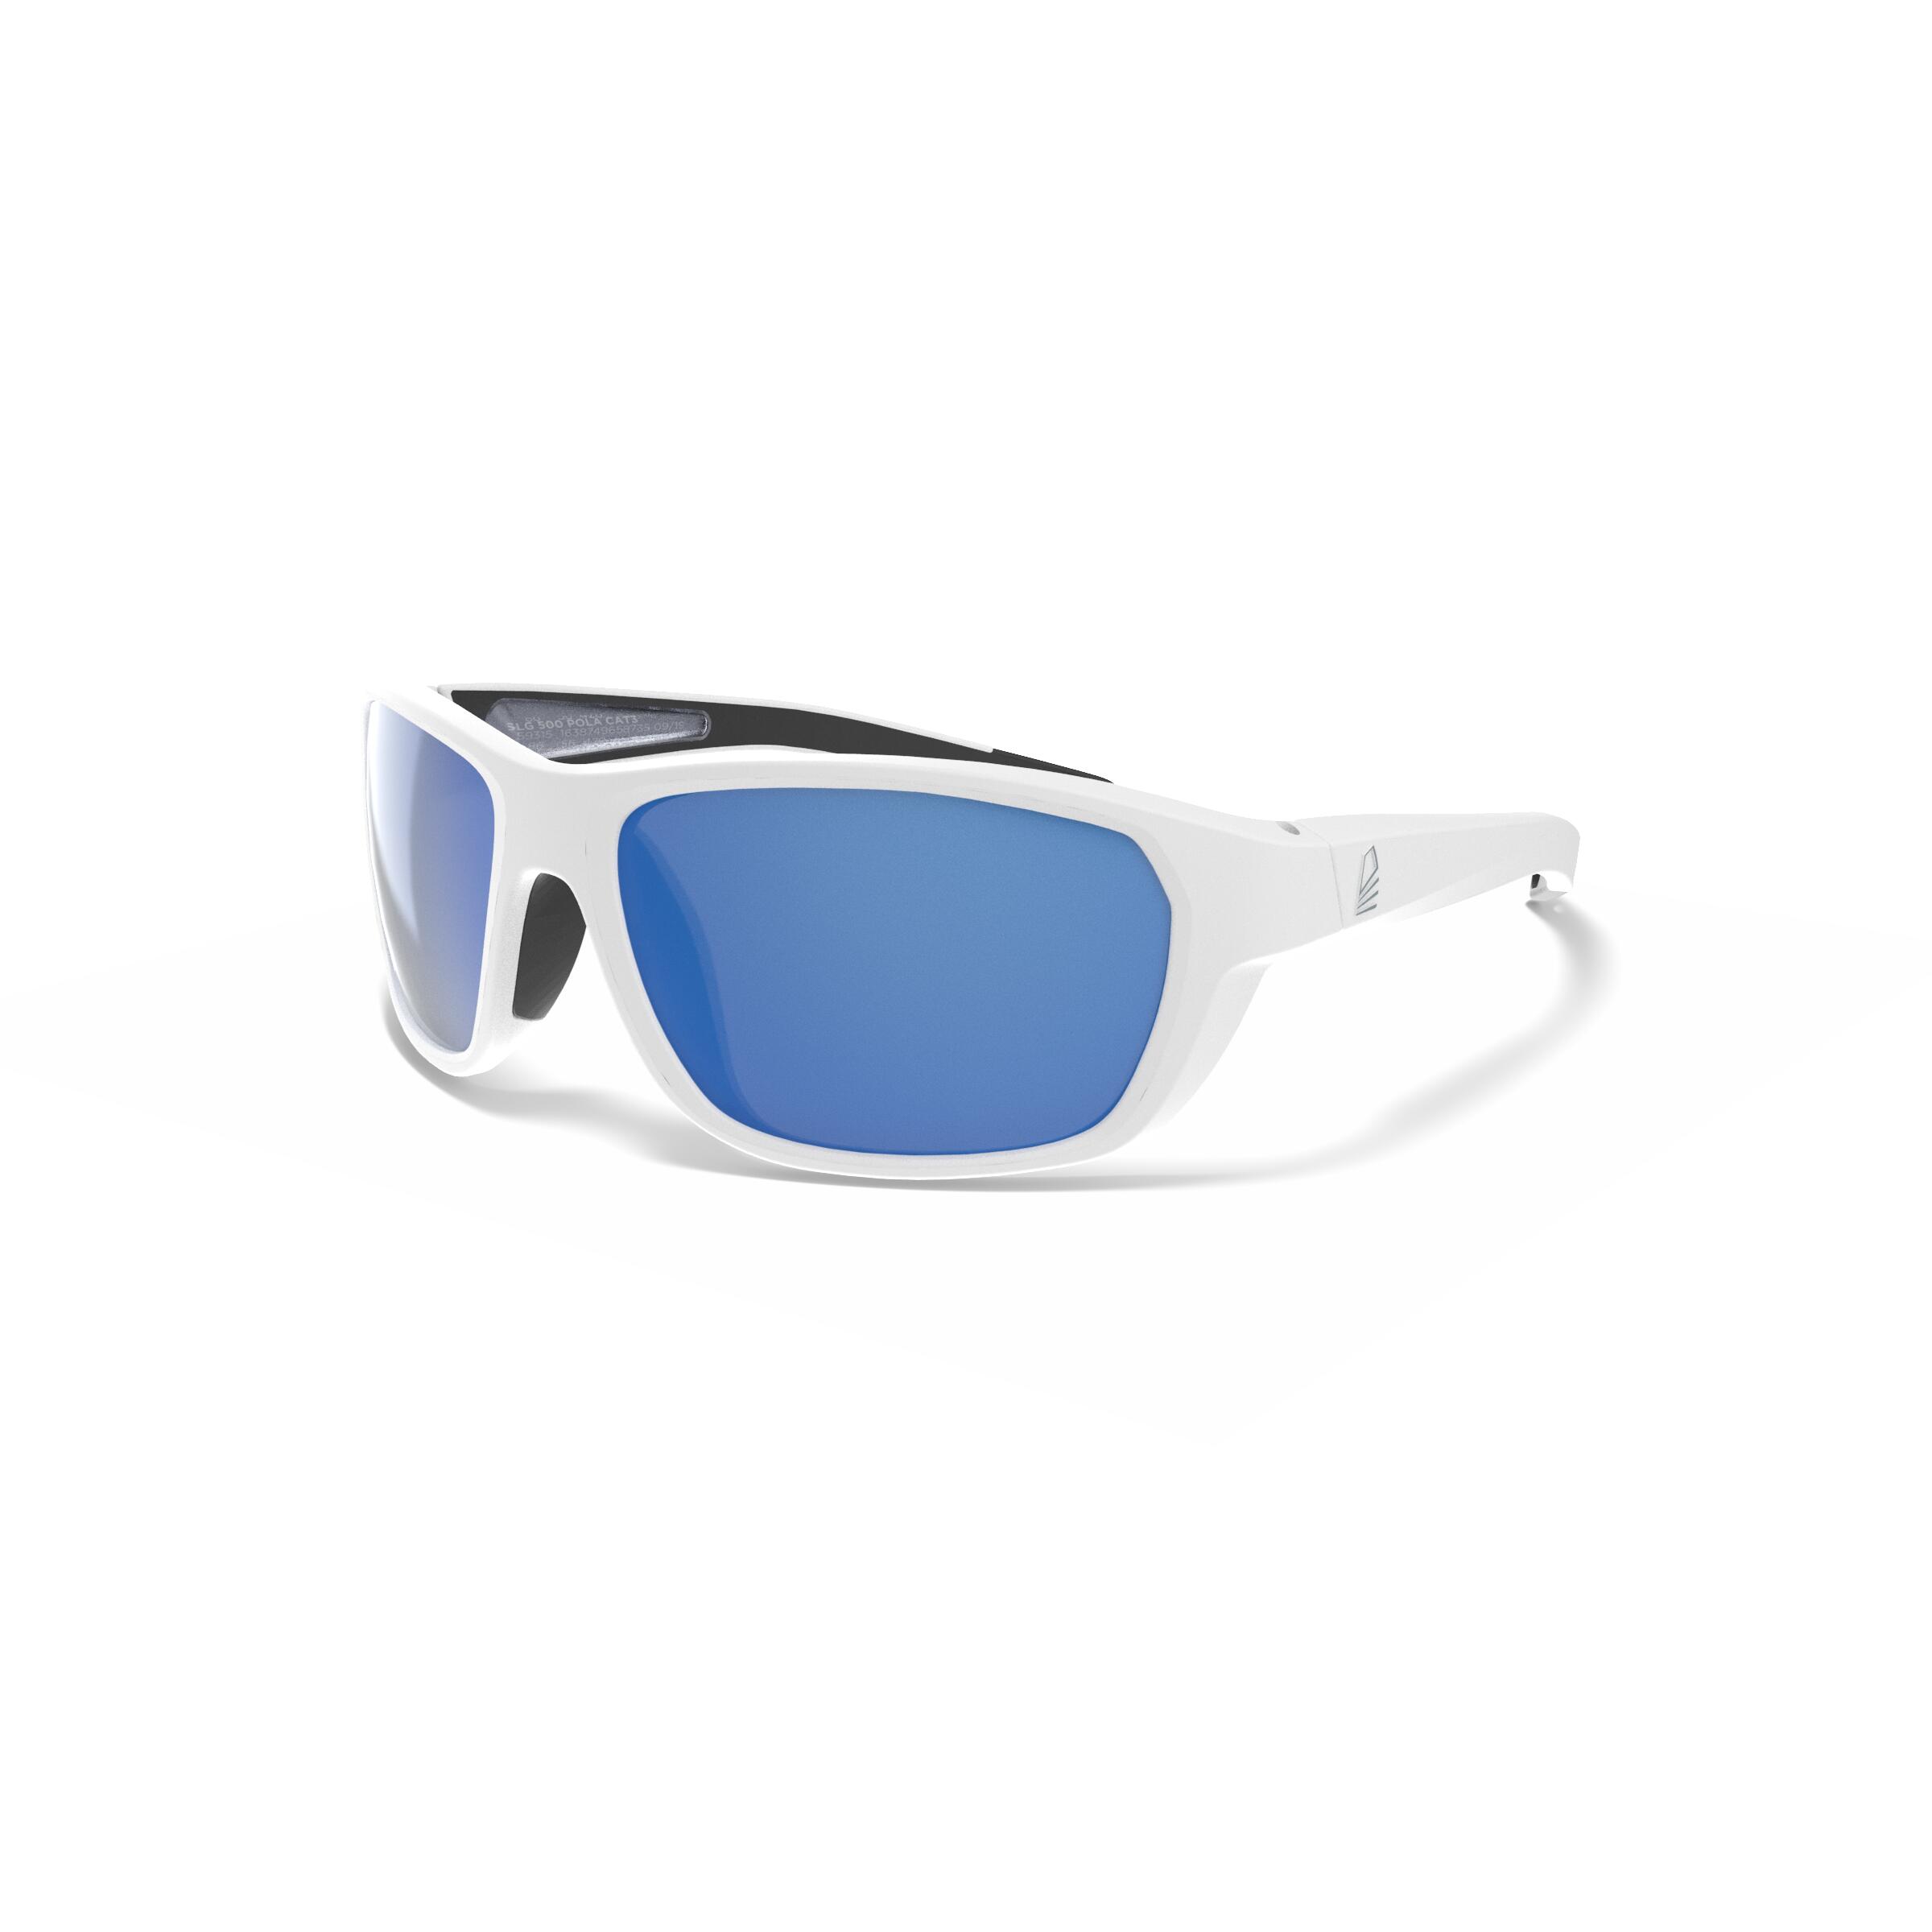 Adults' Sailing Floating Sunglasses With Polarised Lenses - White Blue